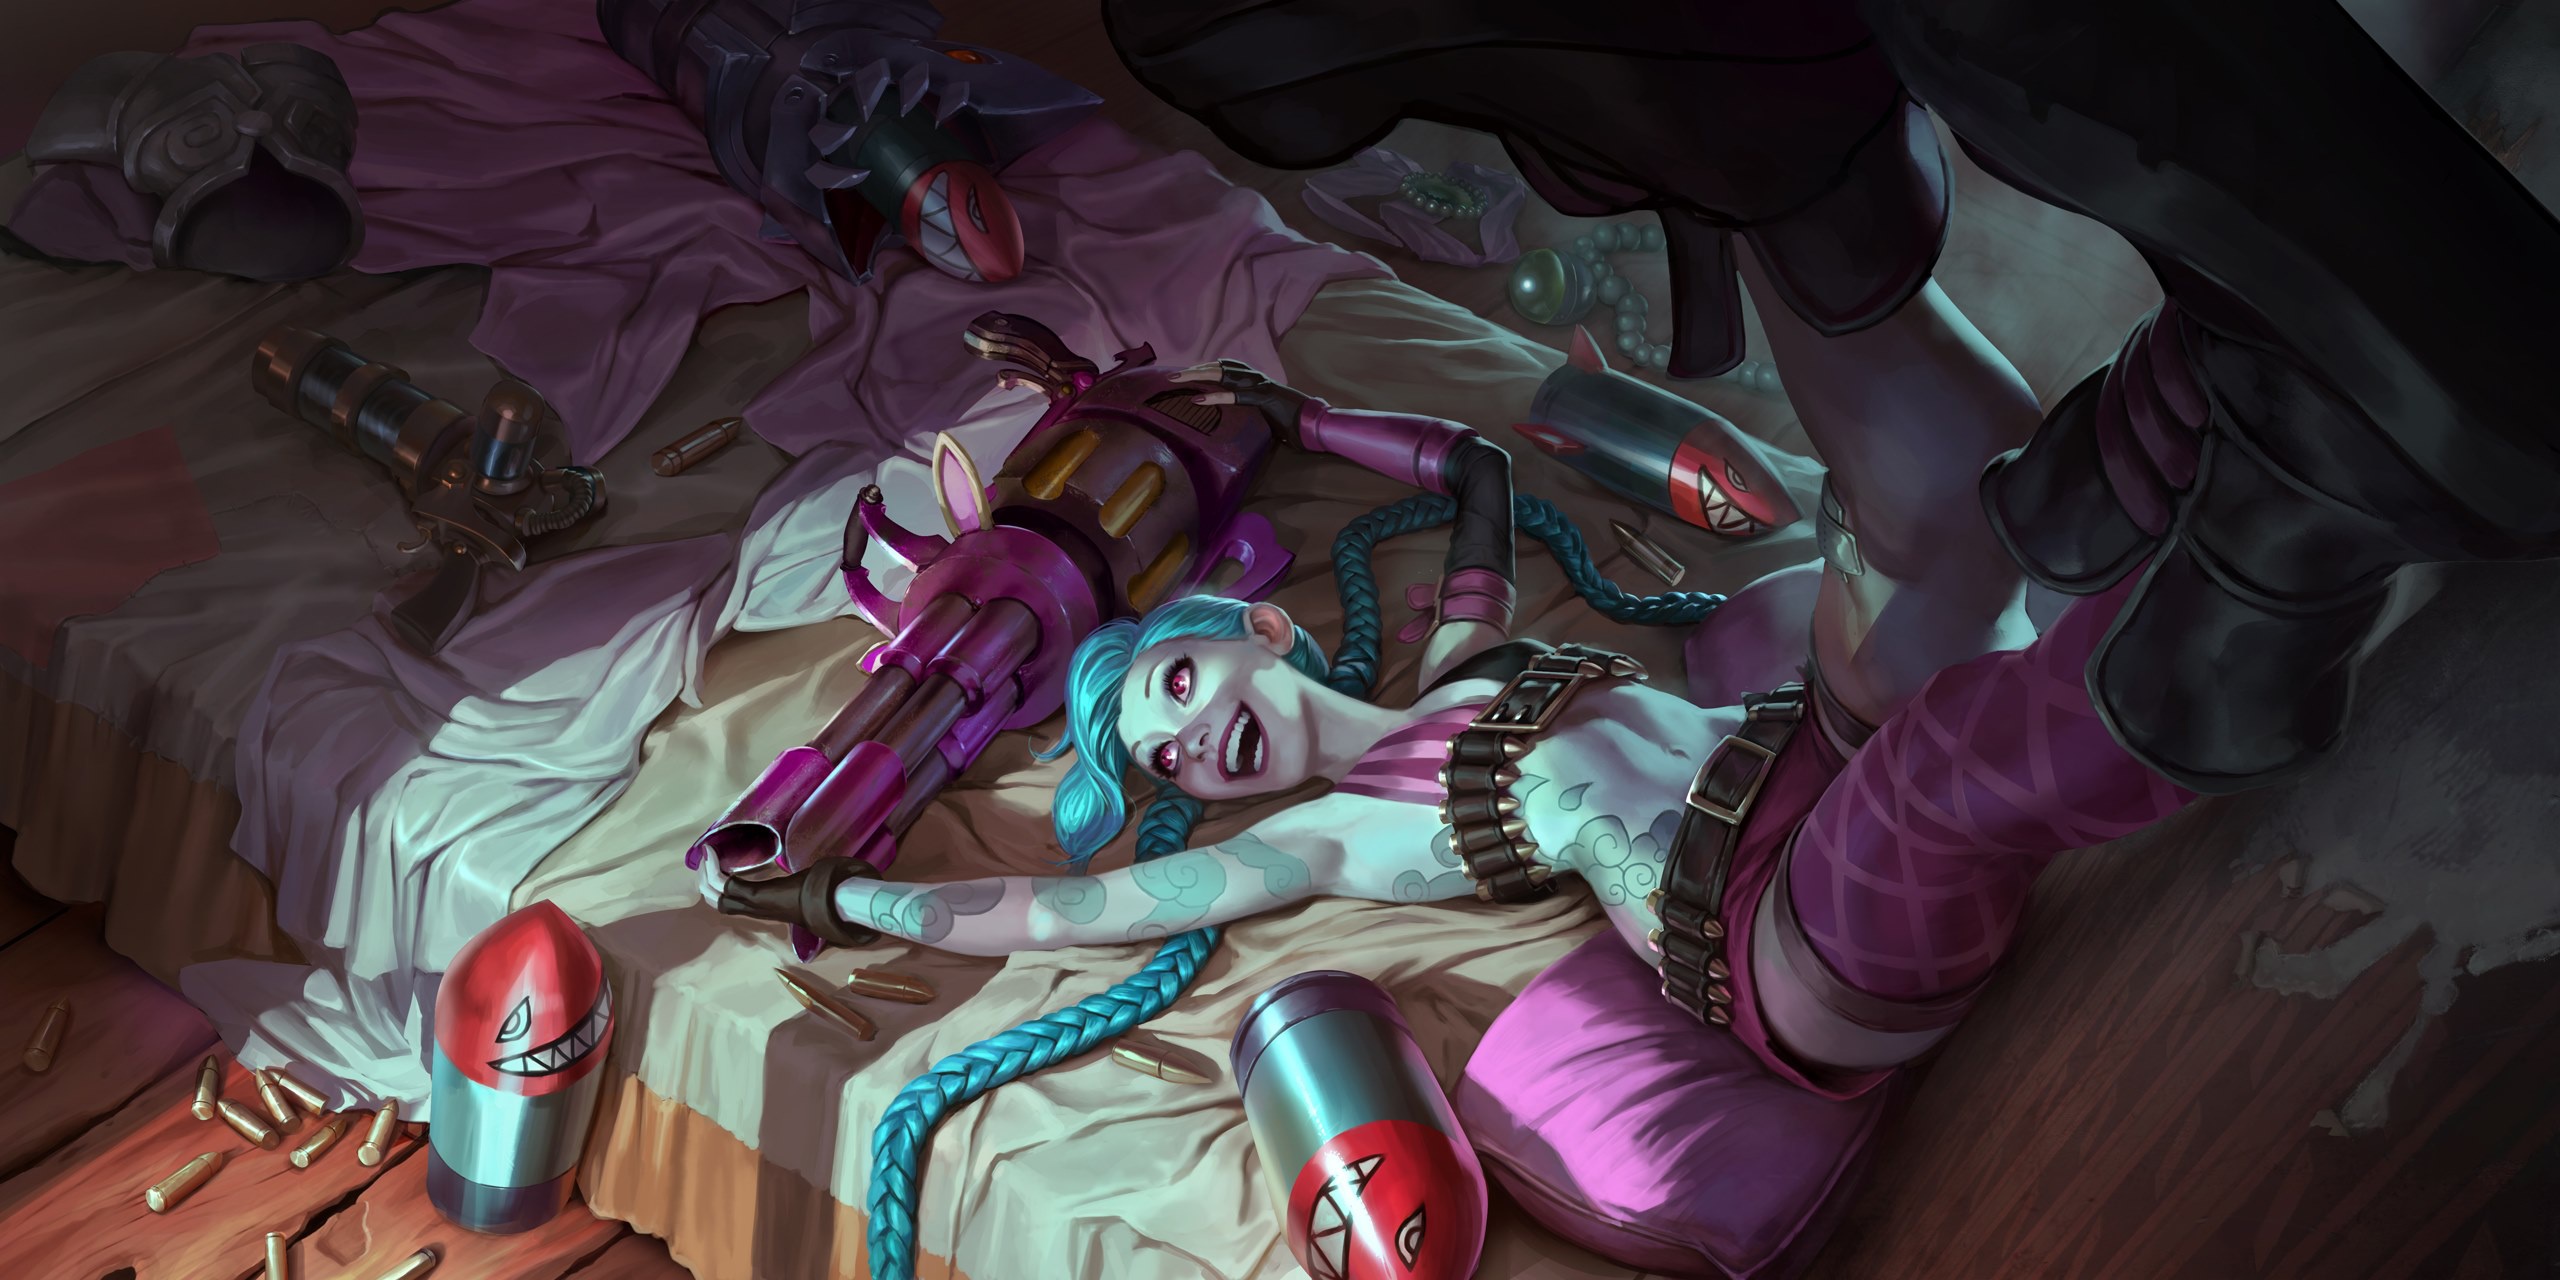 General 2560x1280 Jinx (League of Legends) League of Legends video game girls PC gaming missing sock